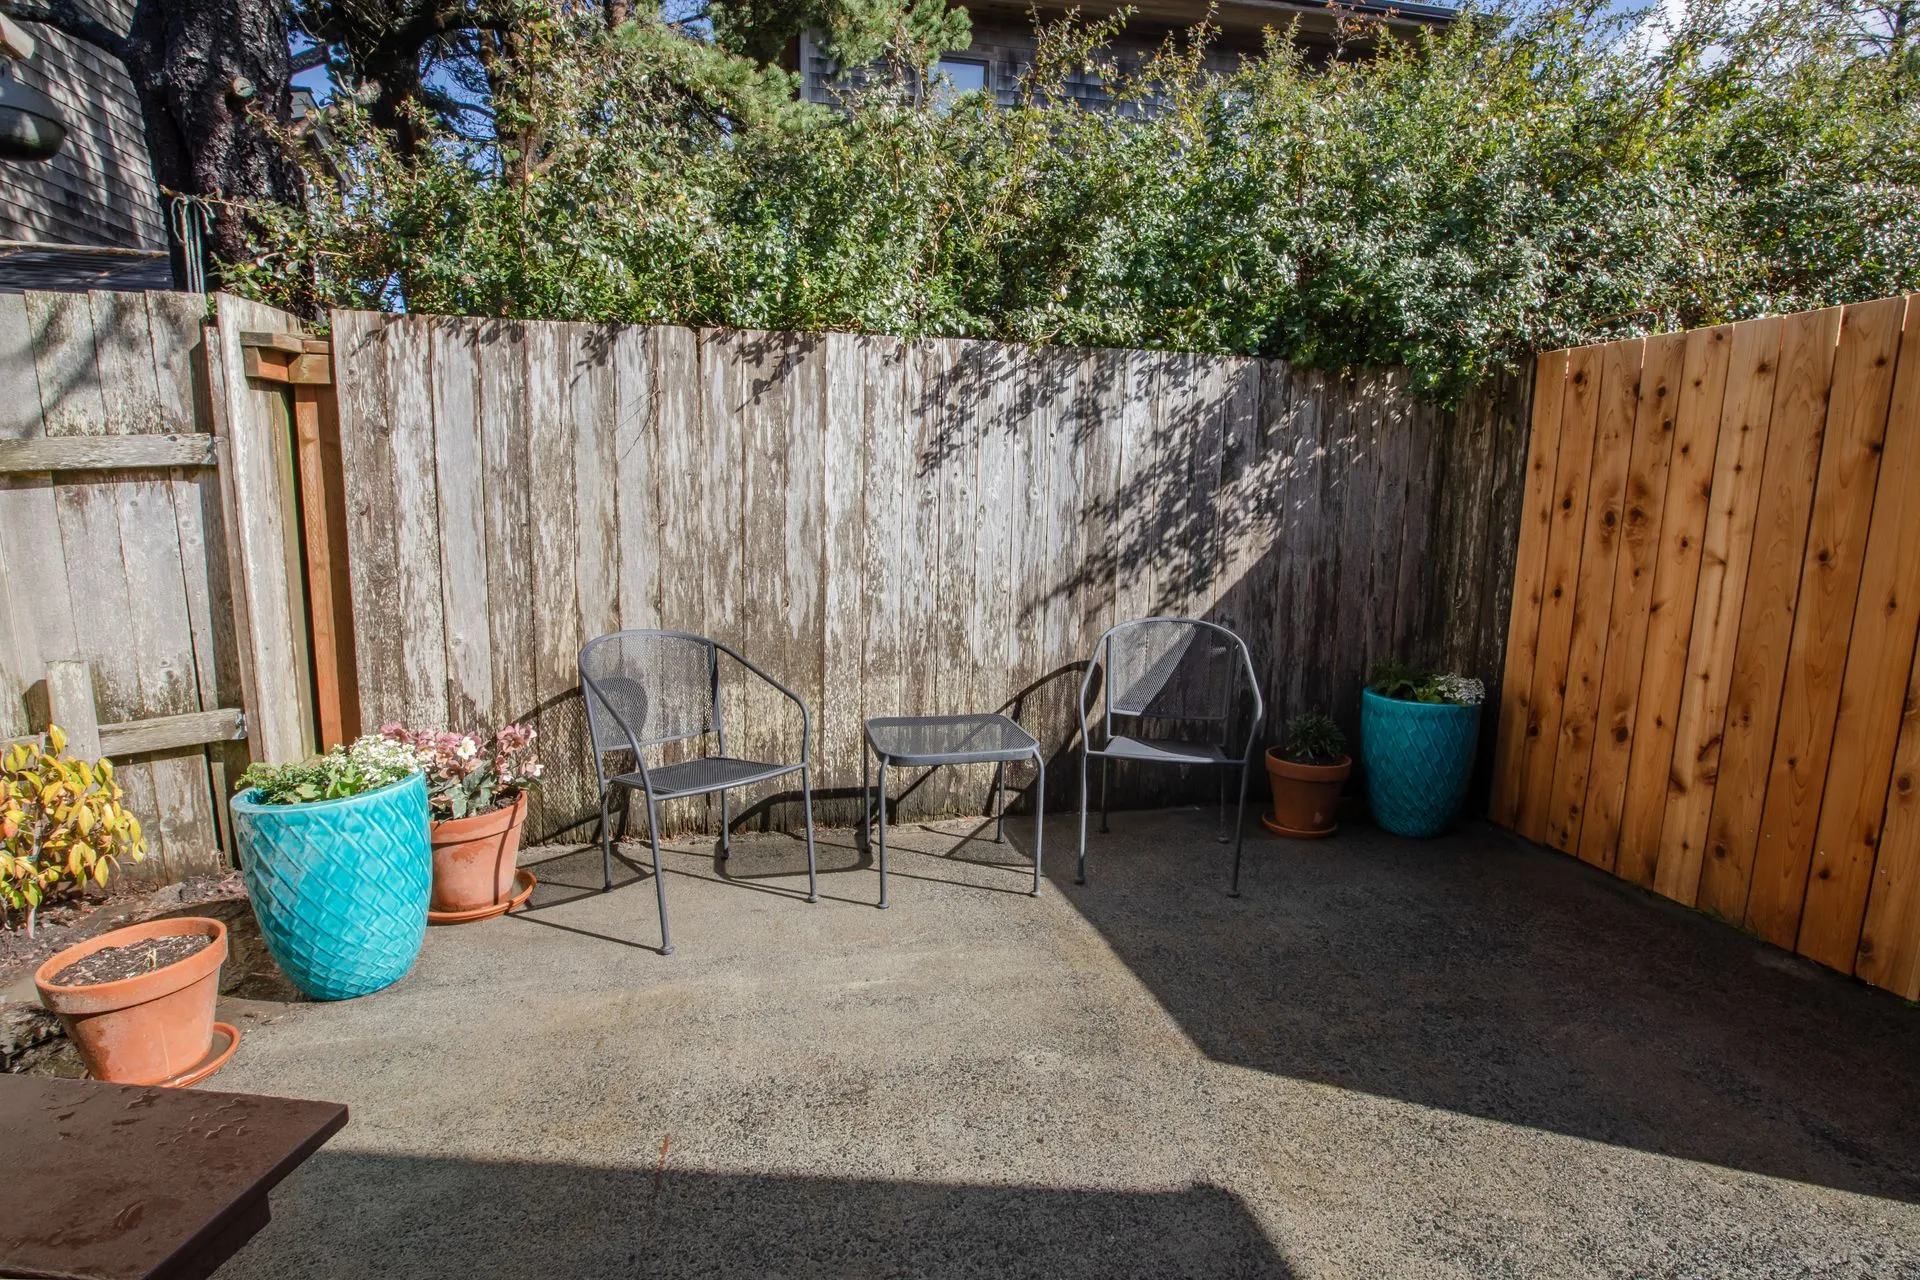 Vacation Rental in Cannon Beach, the Sand Crab patio with chairs